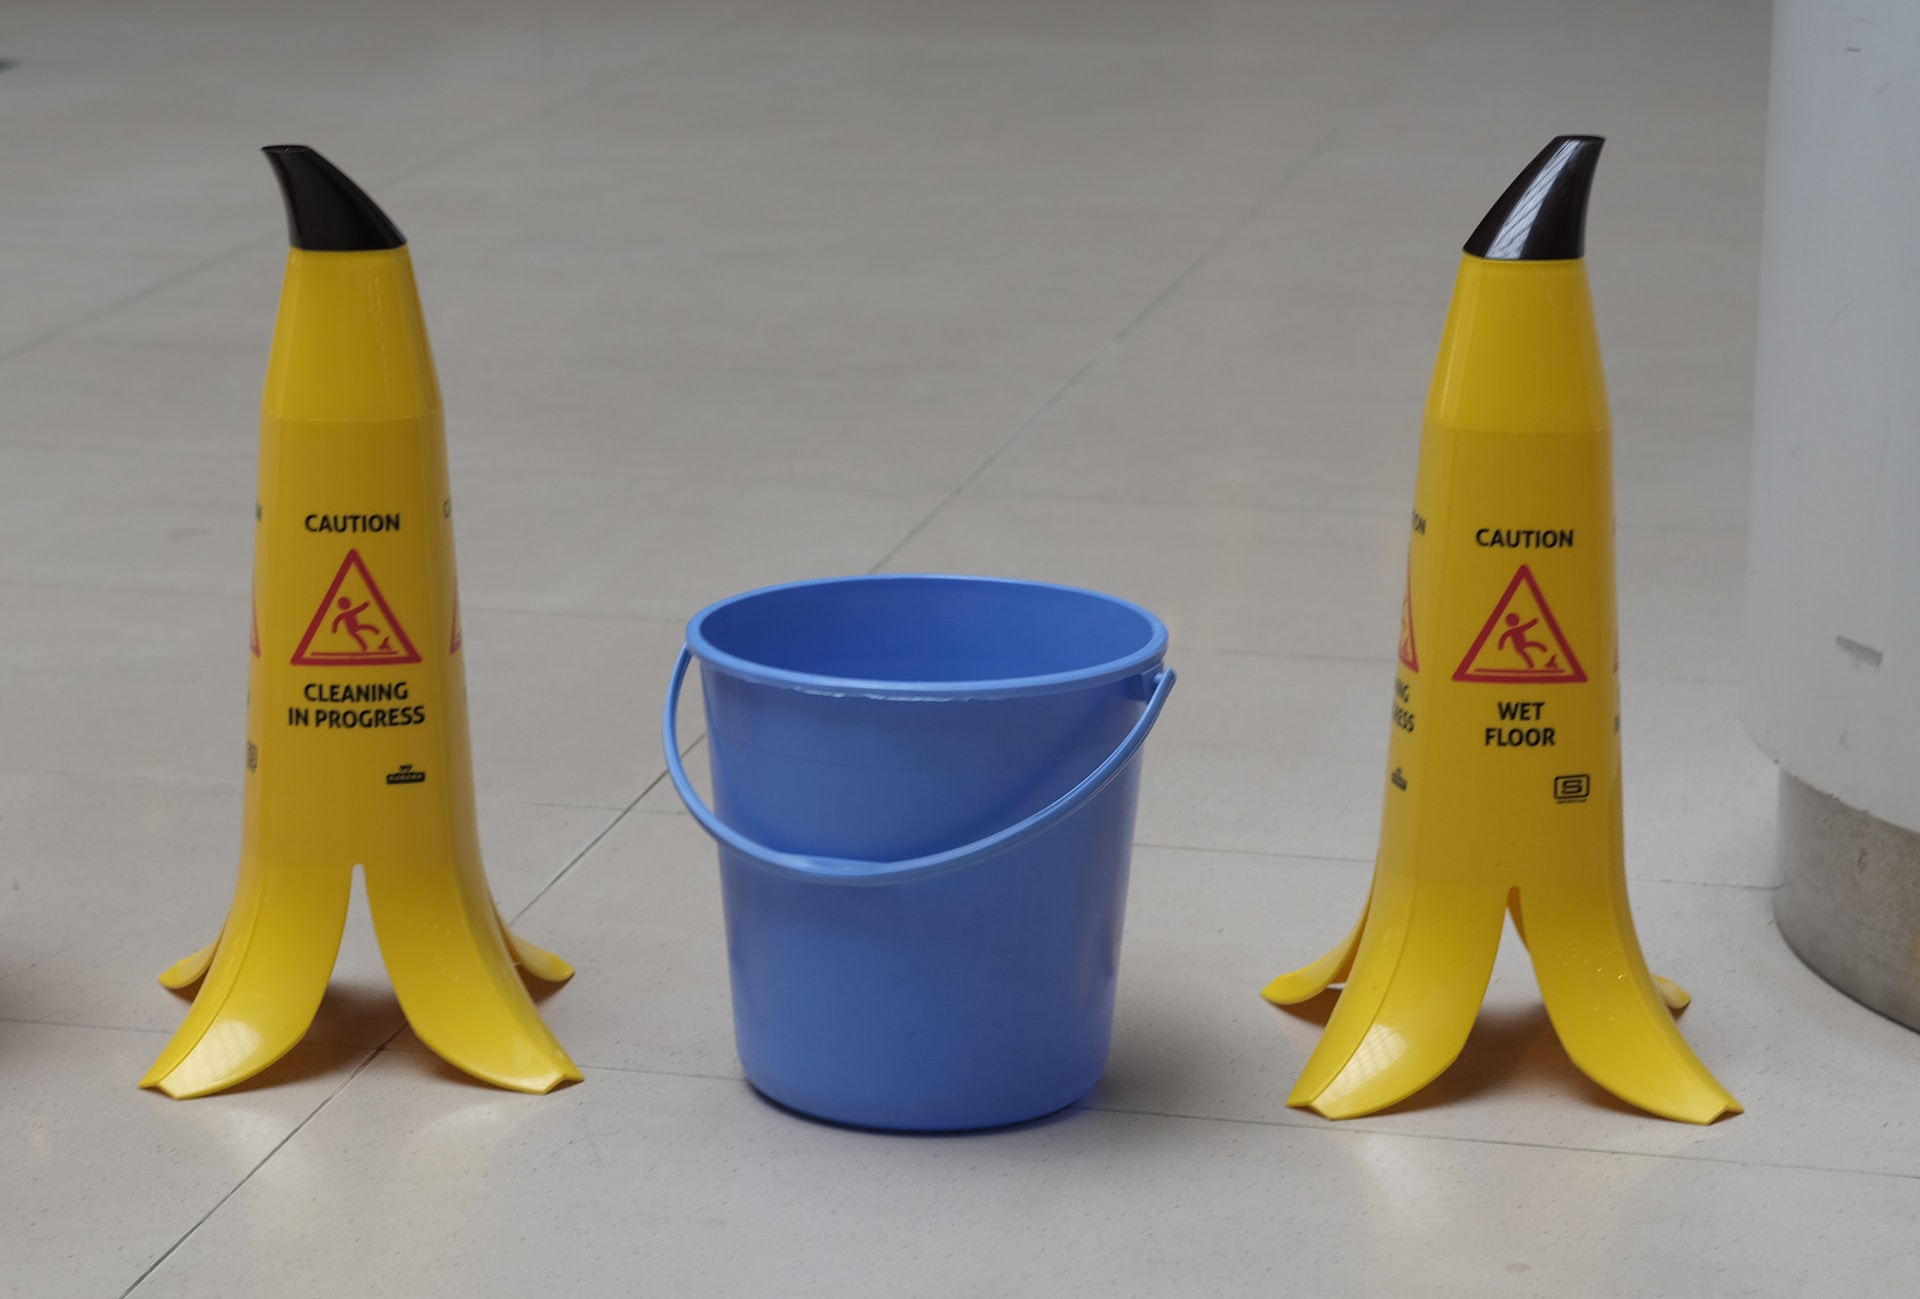 Two banana skin shaped 'cleaning in progress' signs with a bucket